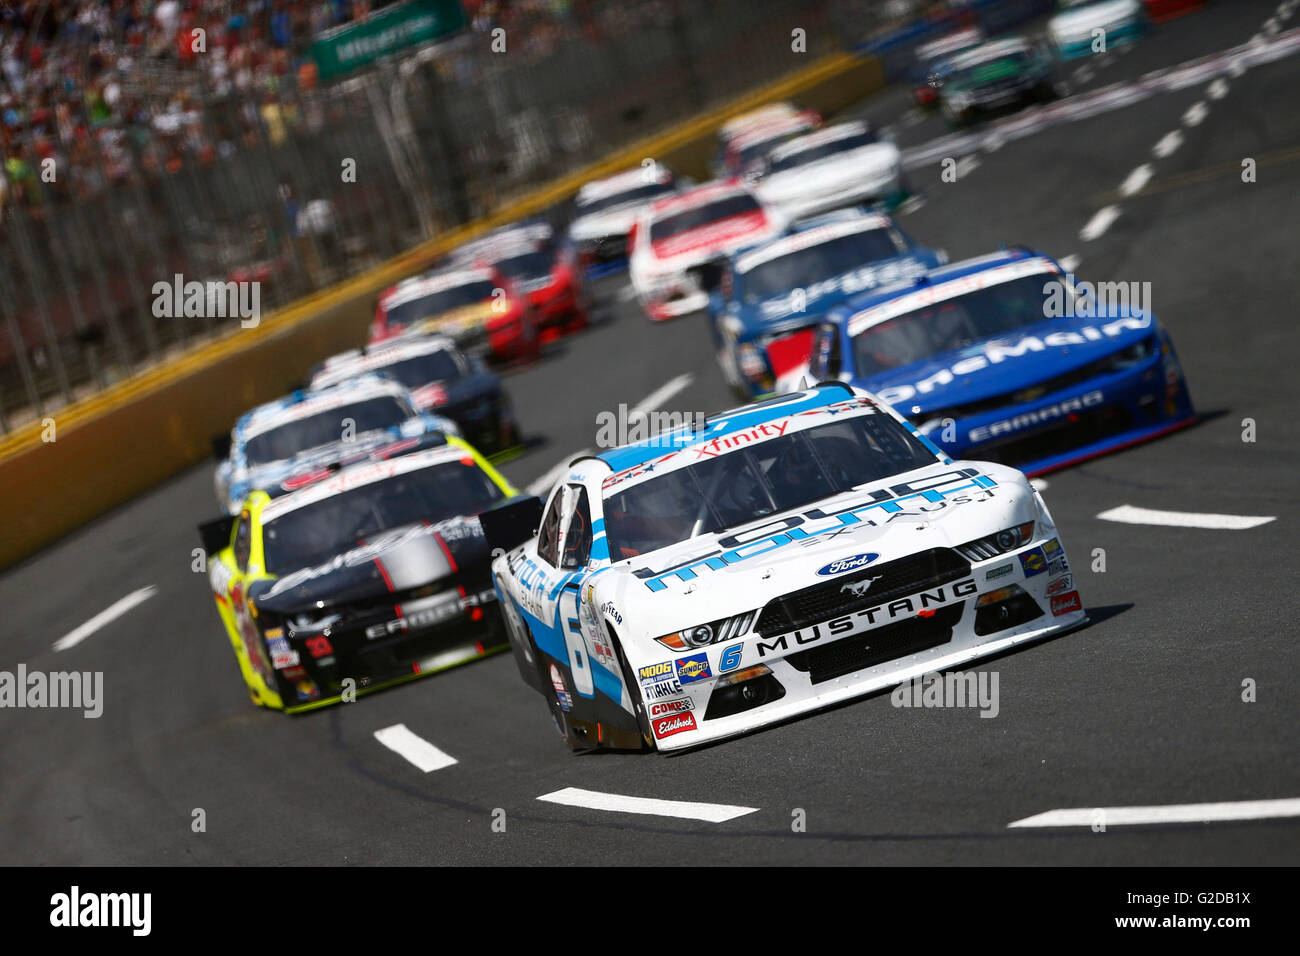 Concord, NC, USA. 28th May, 2016. Concord, NC - May 28, 2016: Darrell Wallace Jr (6) battles for position during the Hisense 300 at the Charlotte Motor Speedway in Concord, NC. © csm/Alamy Live News Stock Photo